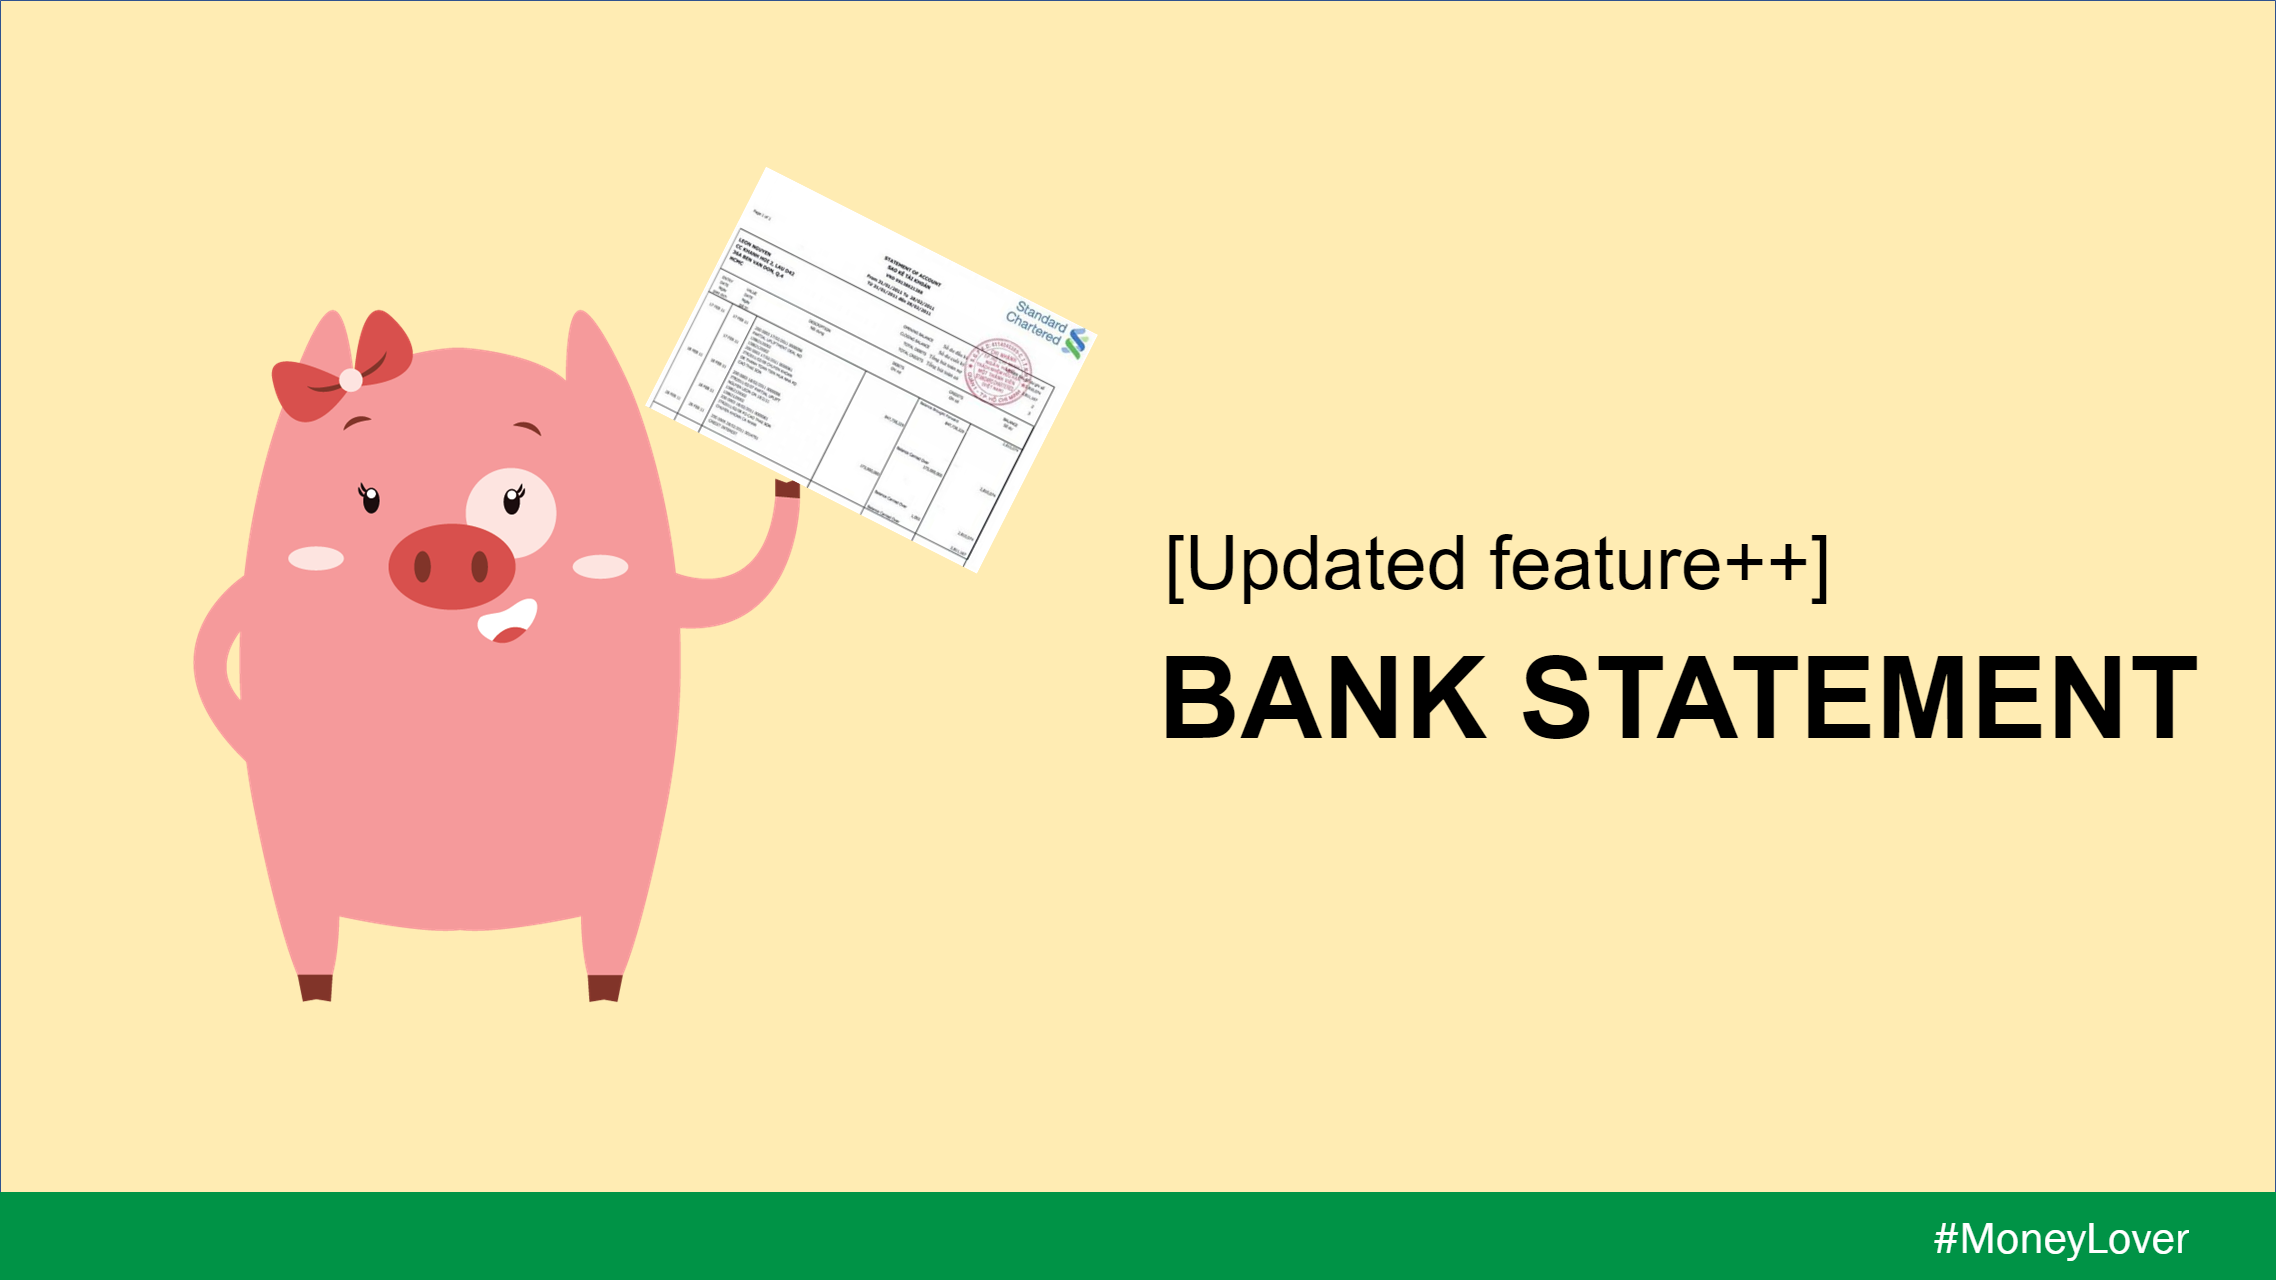 [Updated feature++] Bank Statement - Updating transactions conveniently and effectively